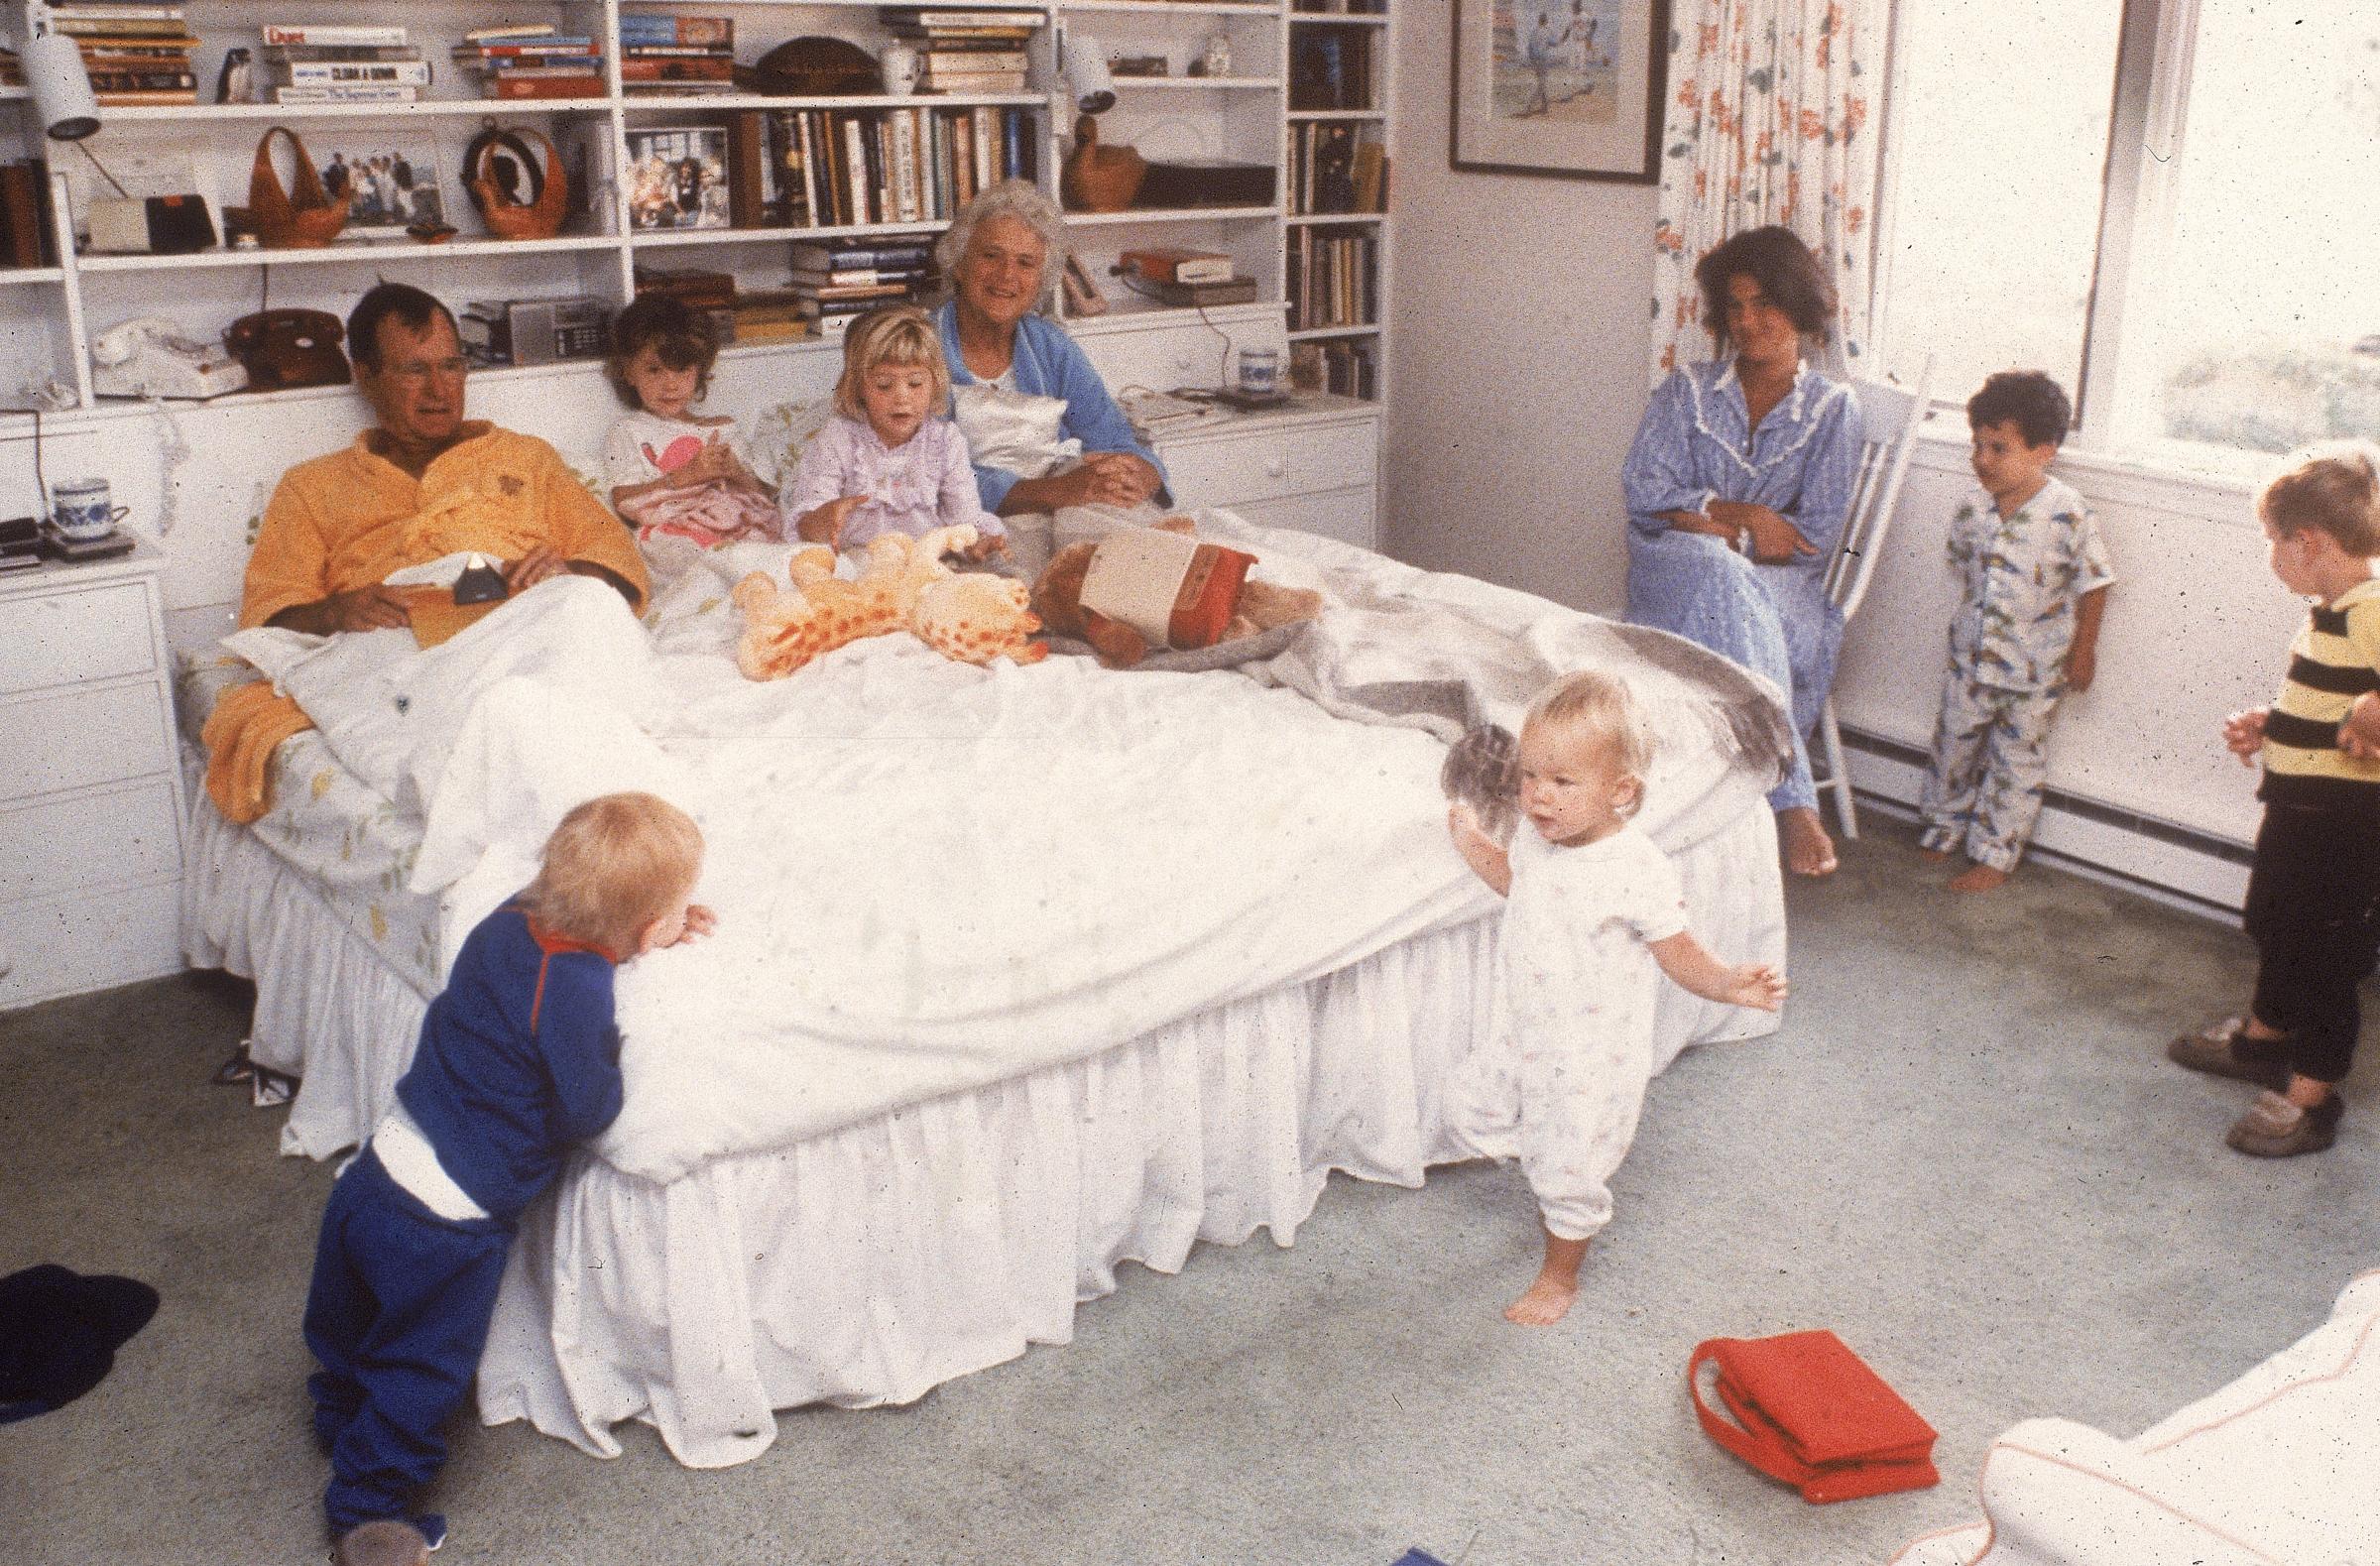 Vice president George H.W. Bush and his wife Barbara relax in bed as their daughter and grandchildren join them at home in Kennebunkport, Maine in 1987.